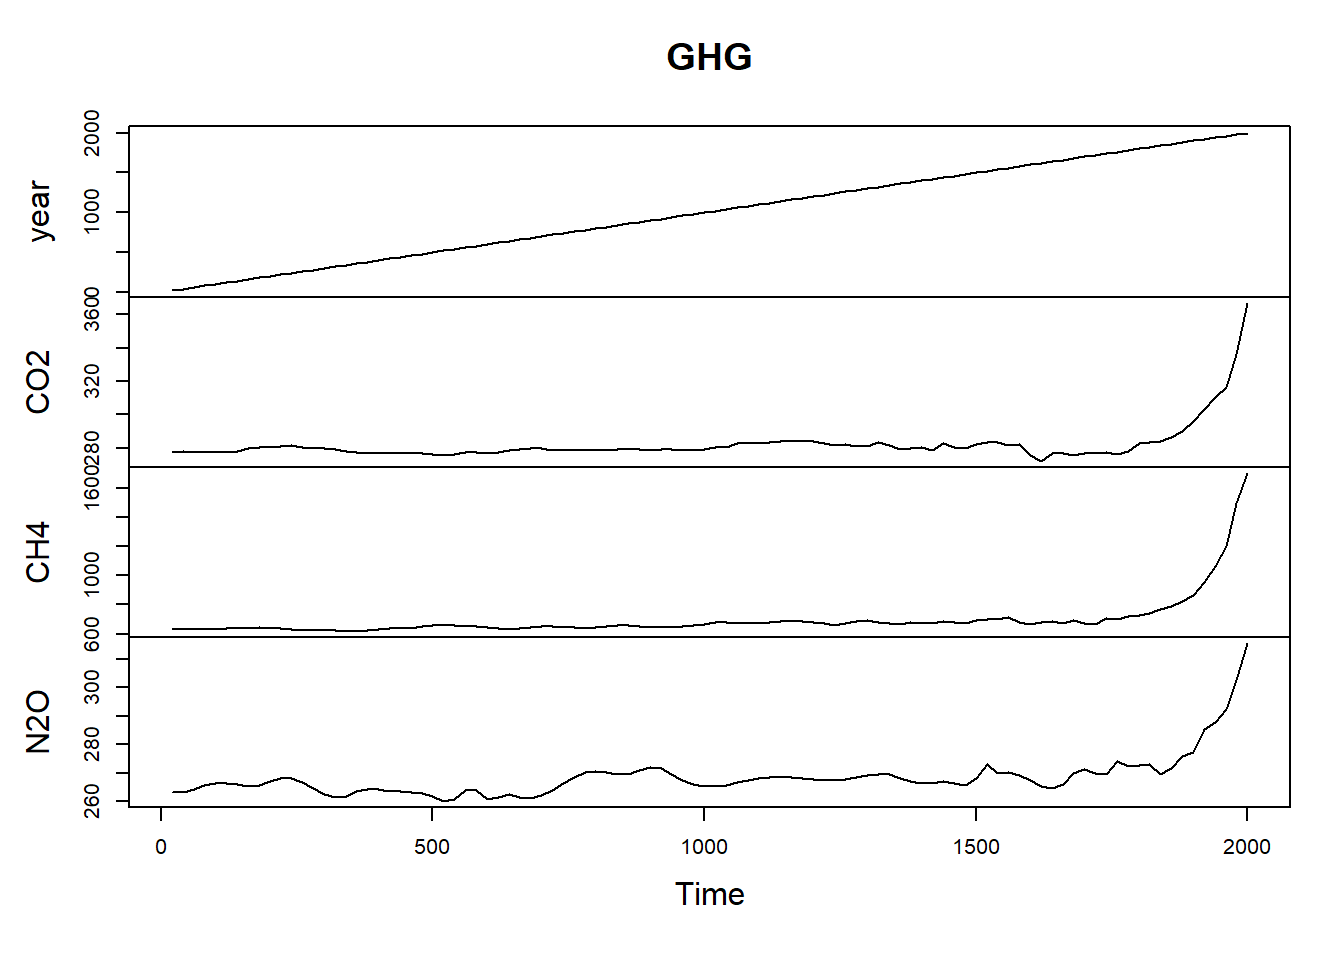 Greenhouse gases with 20 year observations, so 0.05 annual frequency